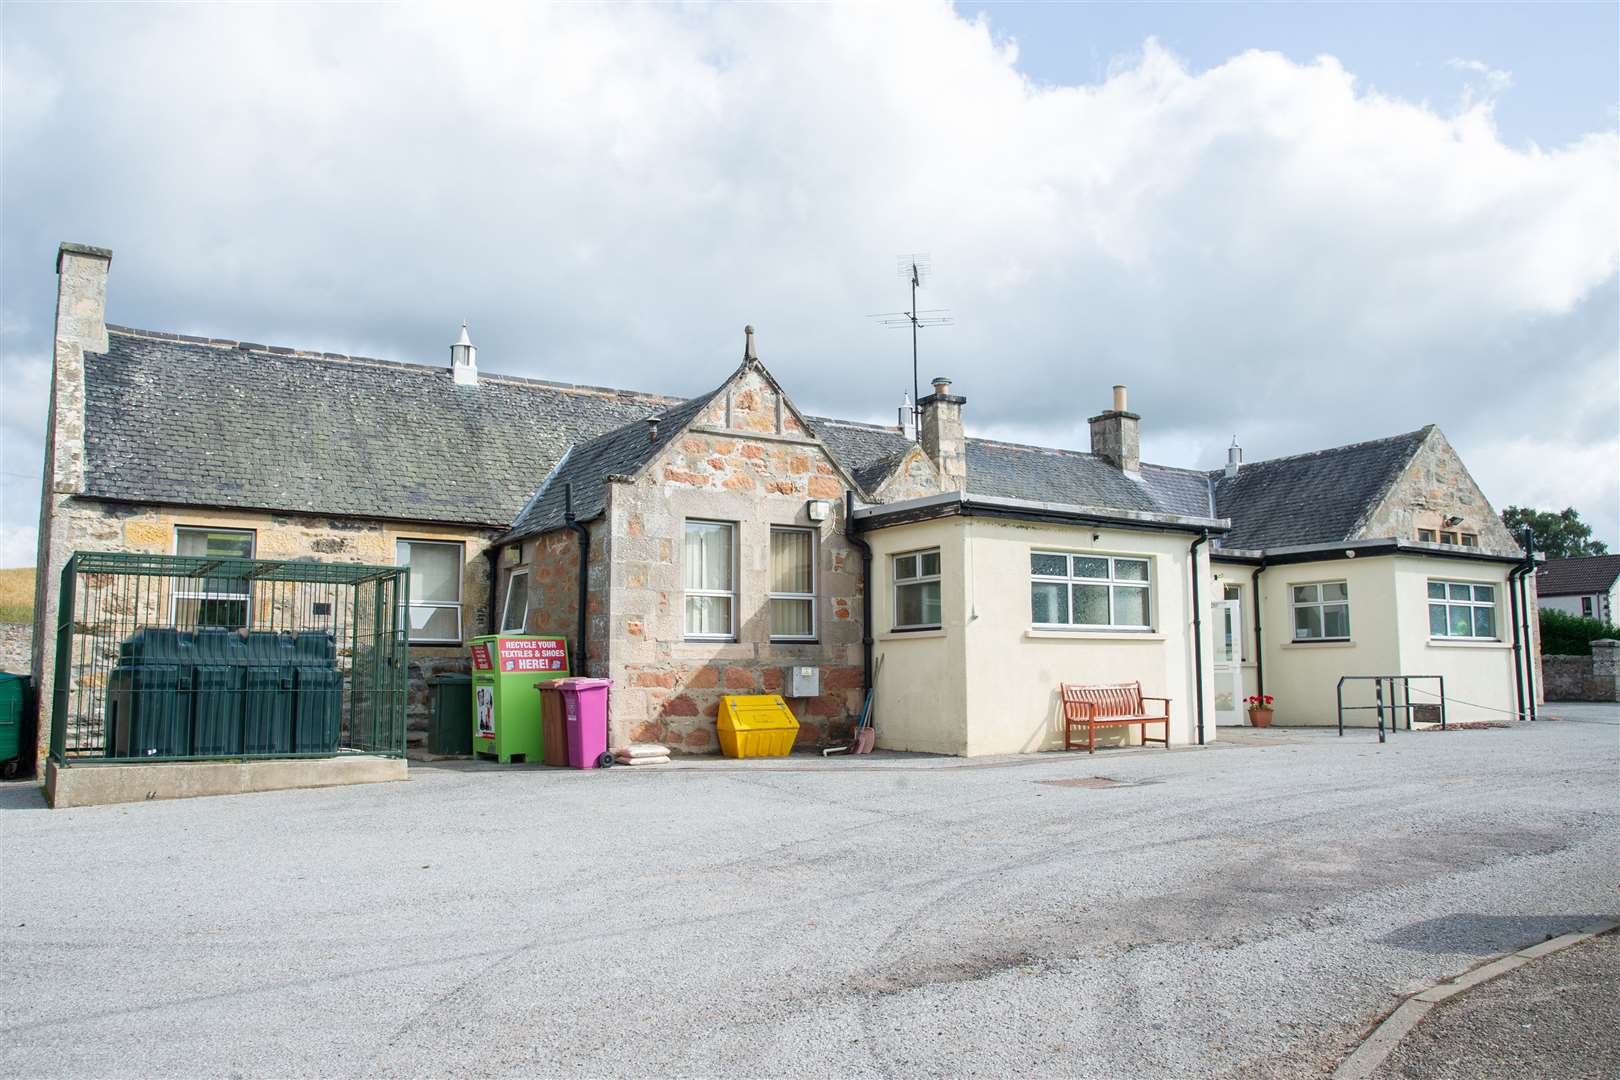 Knockando Primary School has been praised in an inspection report released today. Picture: Daniel Forsyth